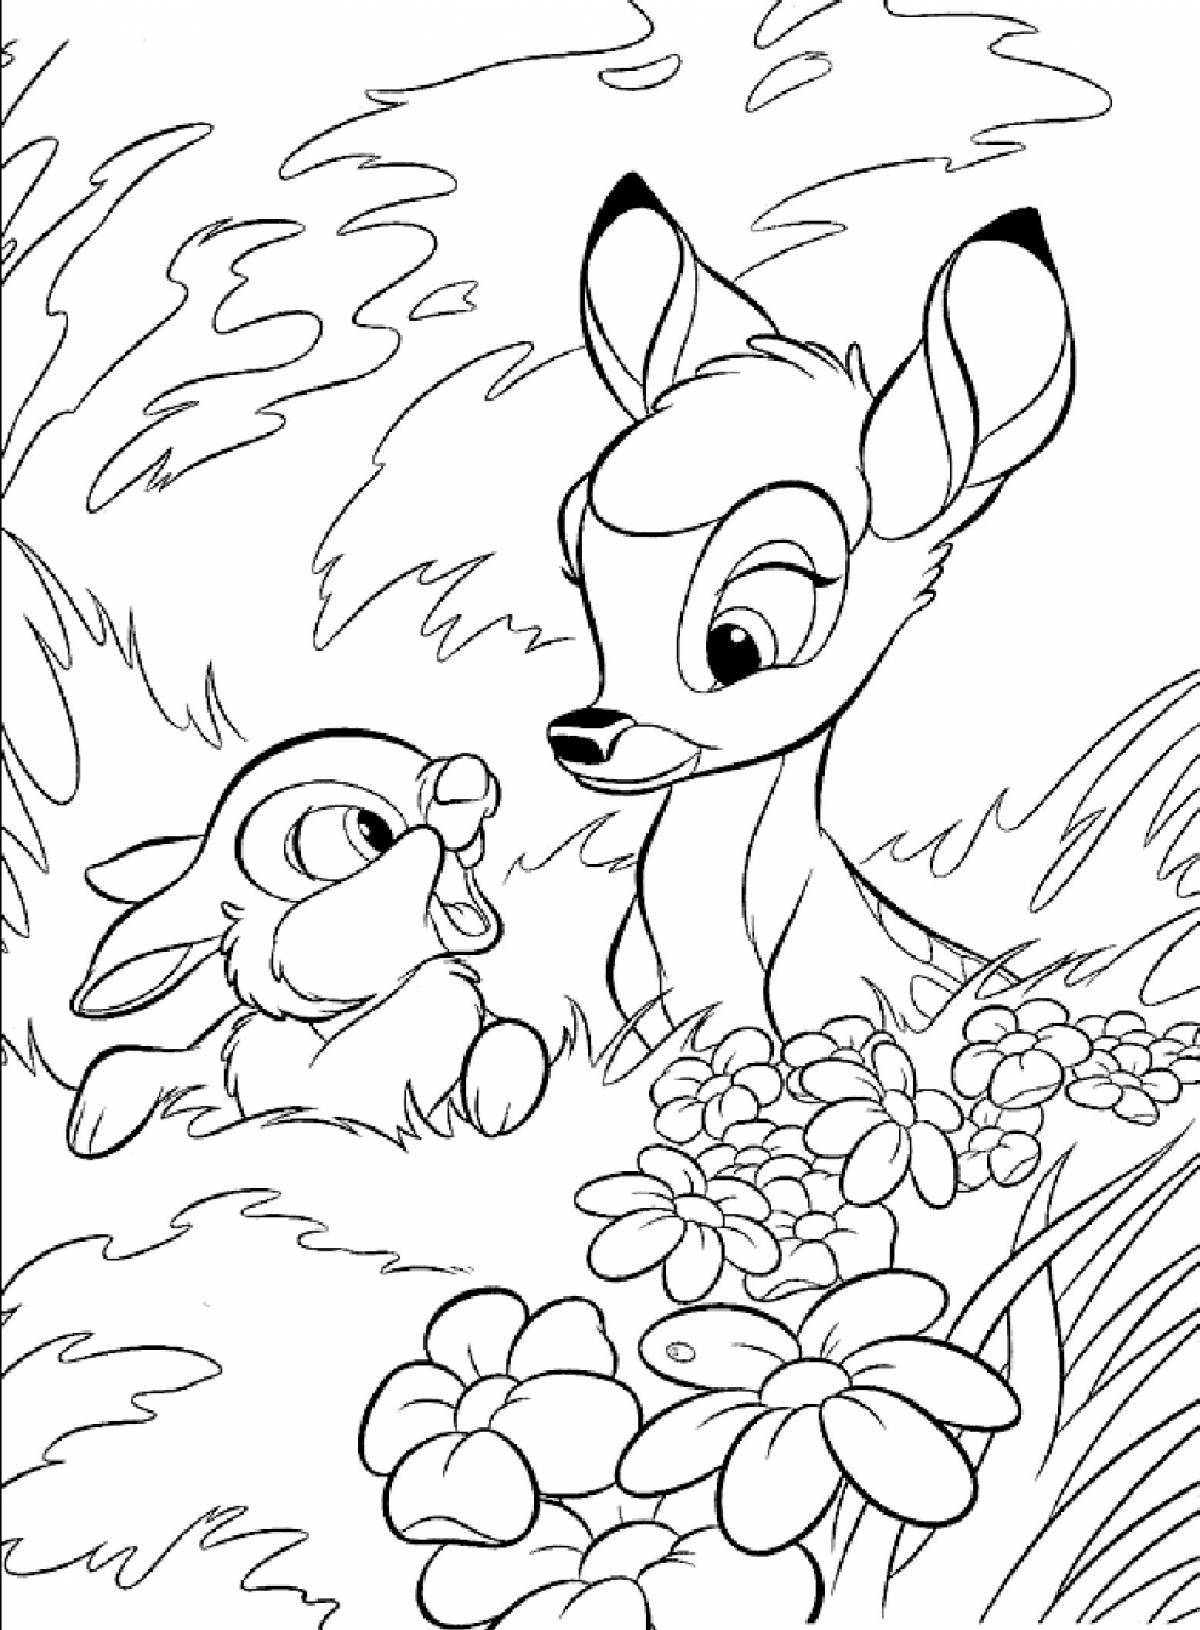 Adorable coloring book for kids 6-7 years old for girls animals